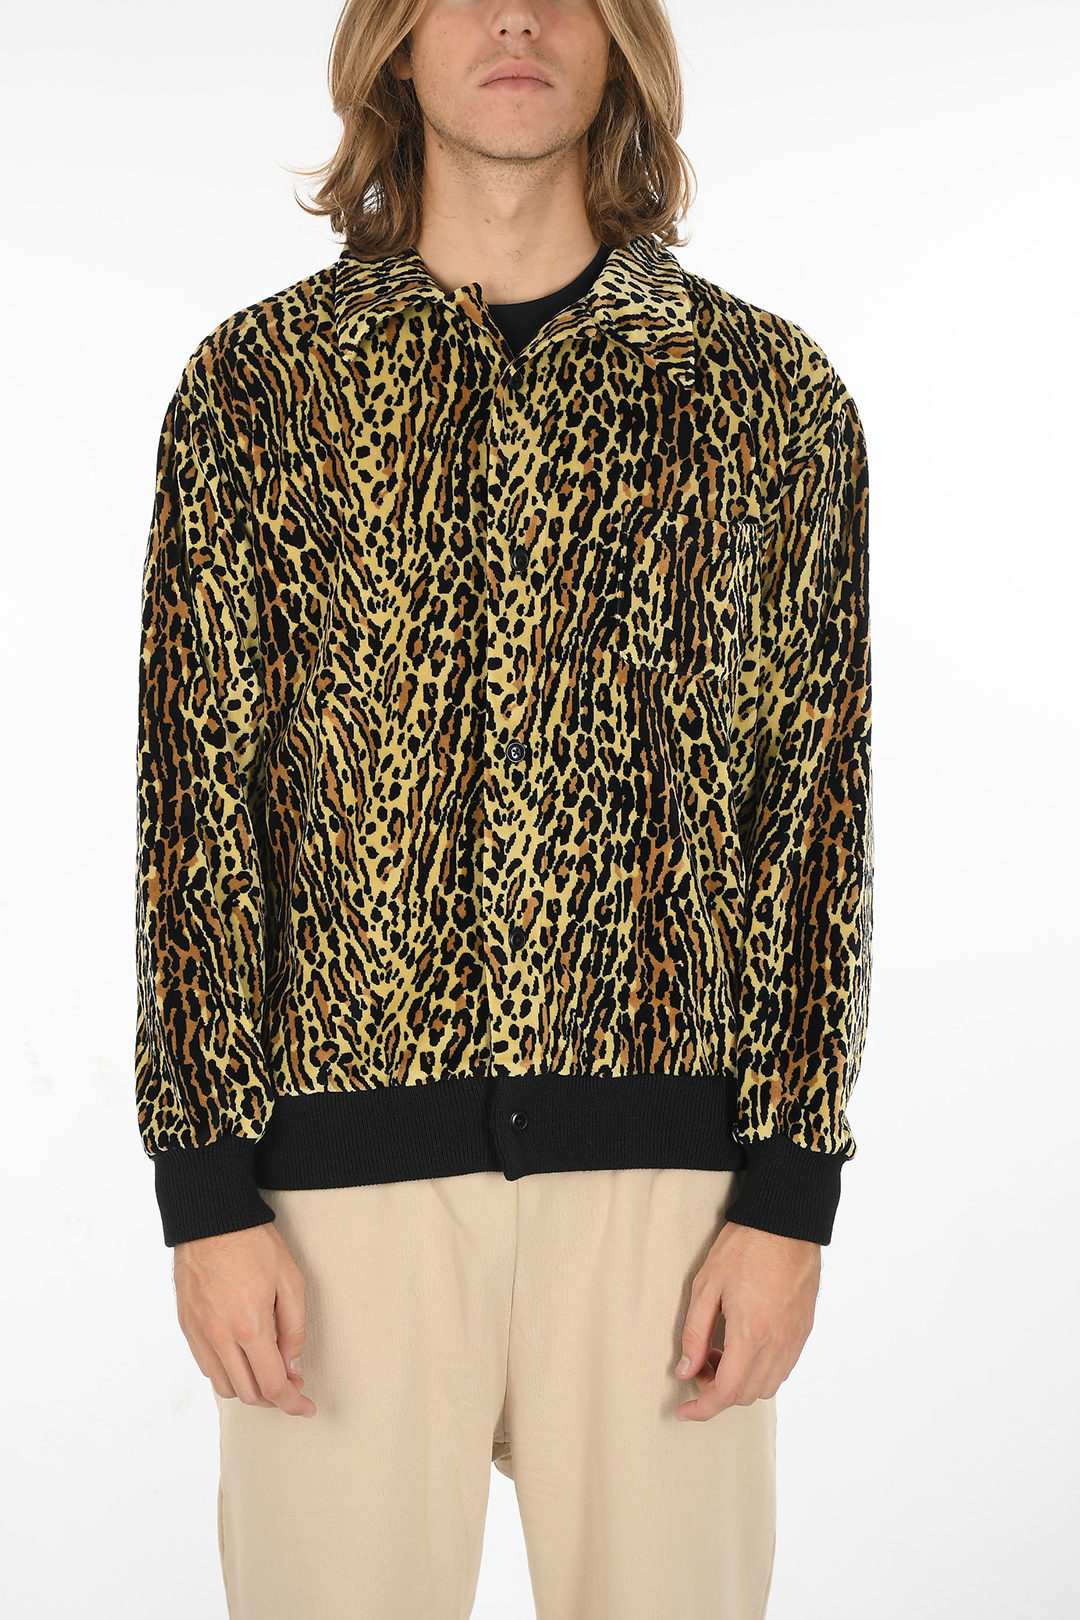 Levi's SPORTSWEAR Ribbed Velour Overshirt in Leopard Print men - Glamood  Outlet